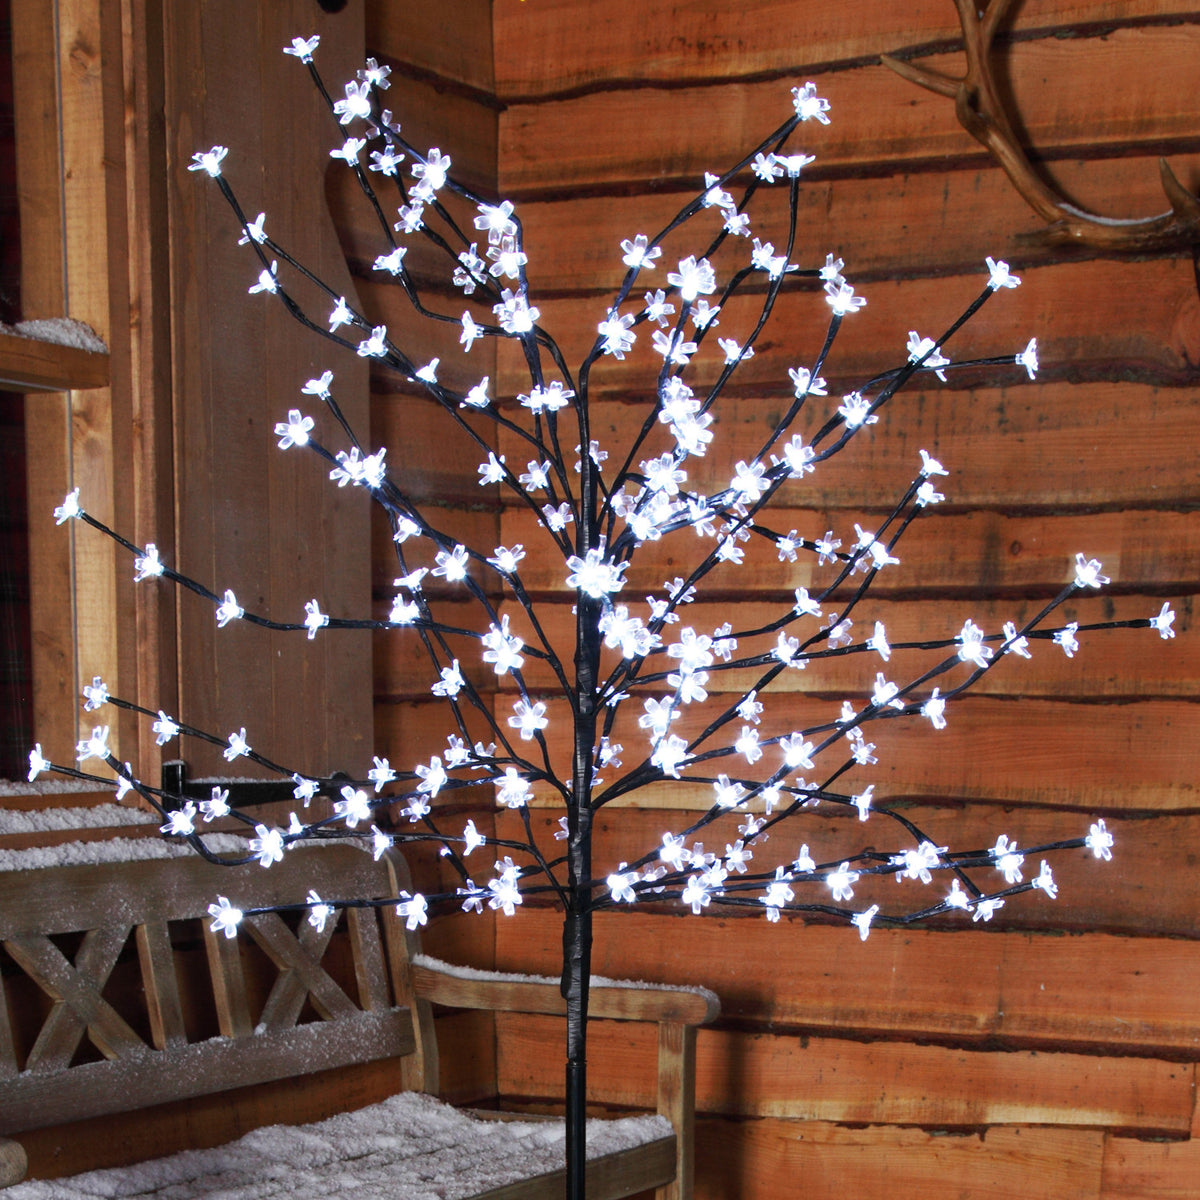 1.8m 200 LED Cherry Blossom Tree with Black Cable by Noma - White